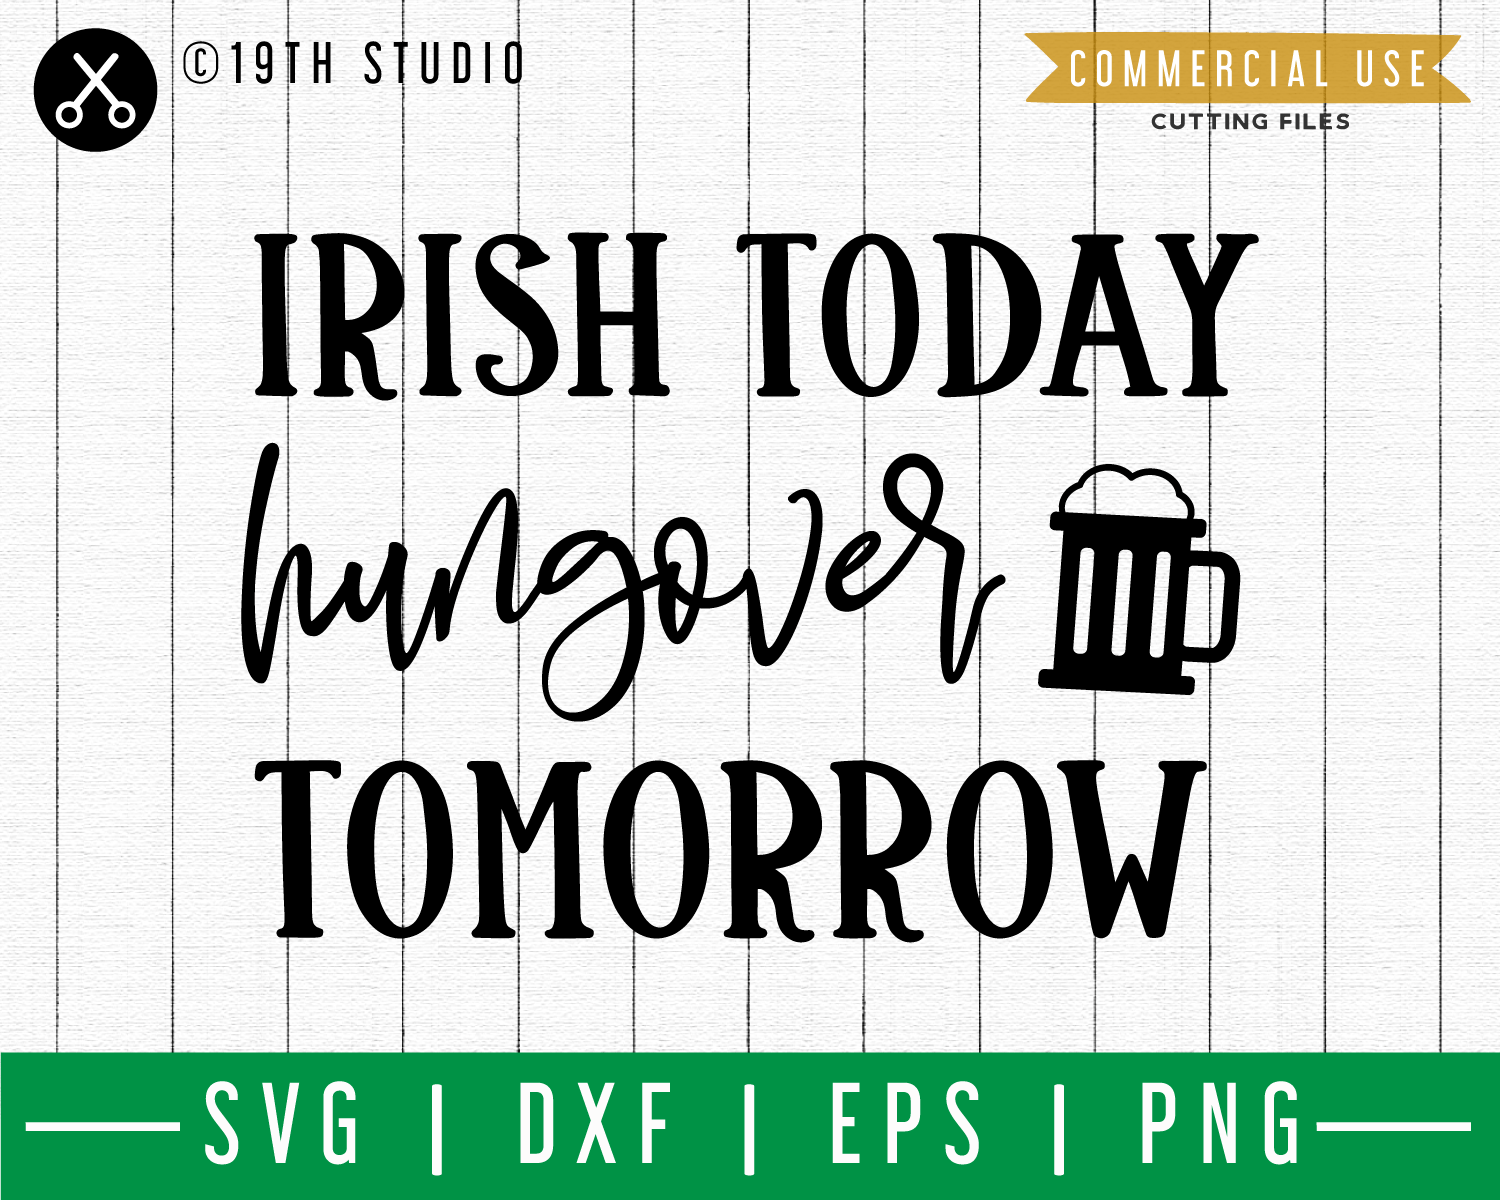 Irish today hungover tomorrow SVG | A St. Patrick's Day SVG cut file M45F Craft House SVG - SVG files for Cricut and Silhouette